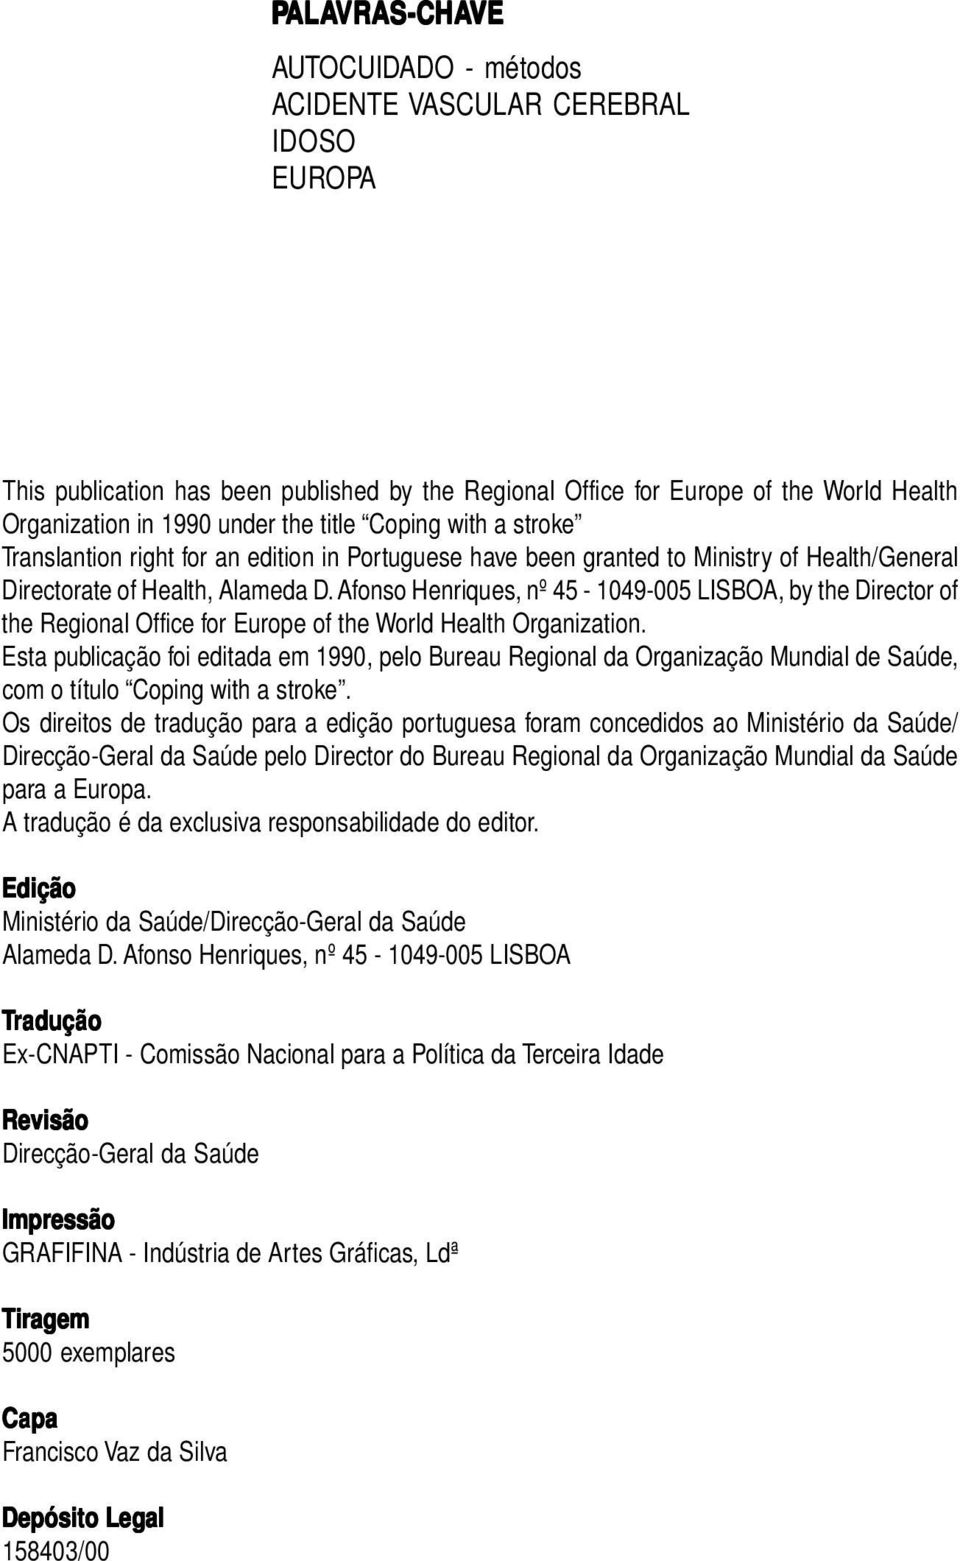 Afonso Henriques, nº 45-1049-005 LISBOA, by the Director of the Regional Office for Europe of the World Health Organization.